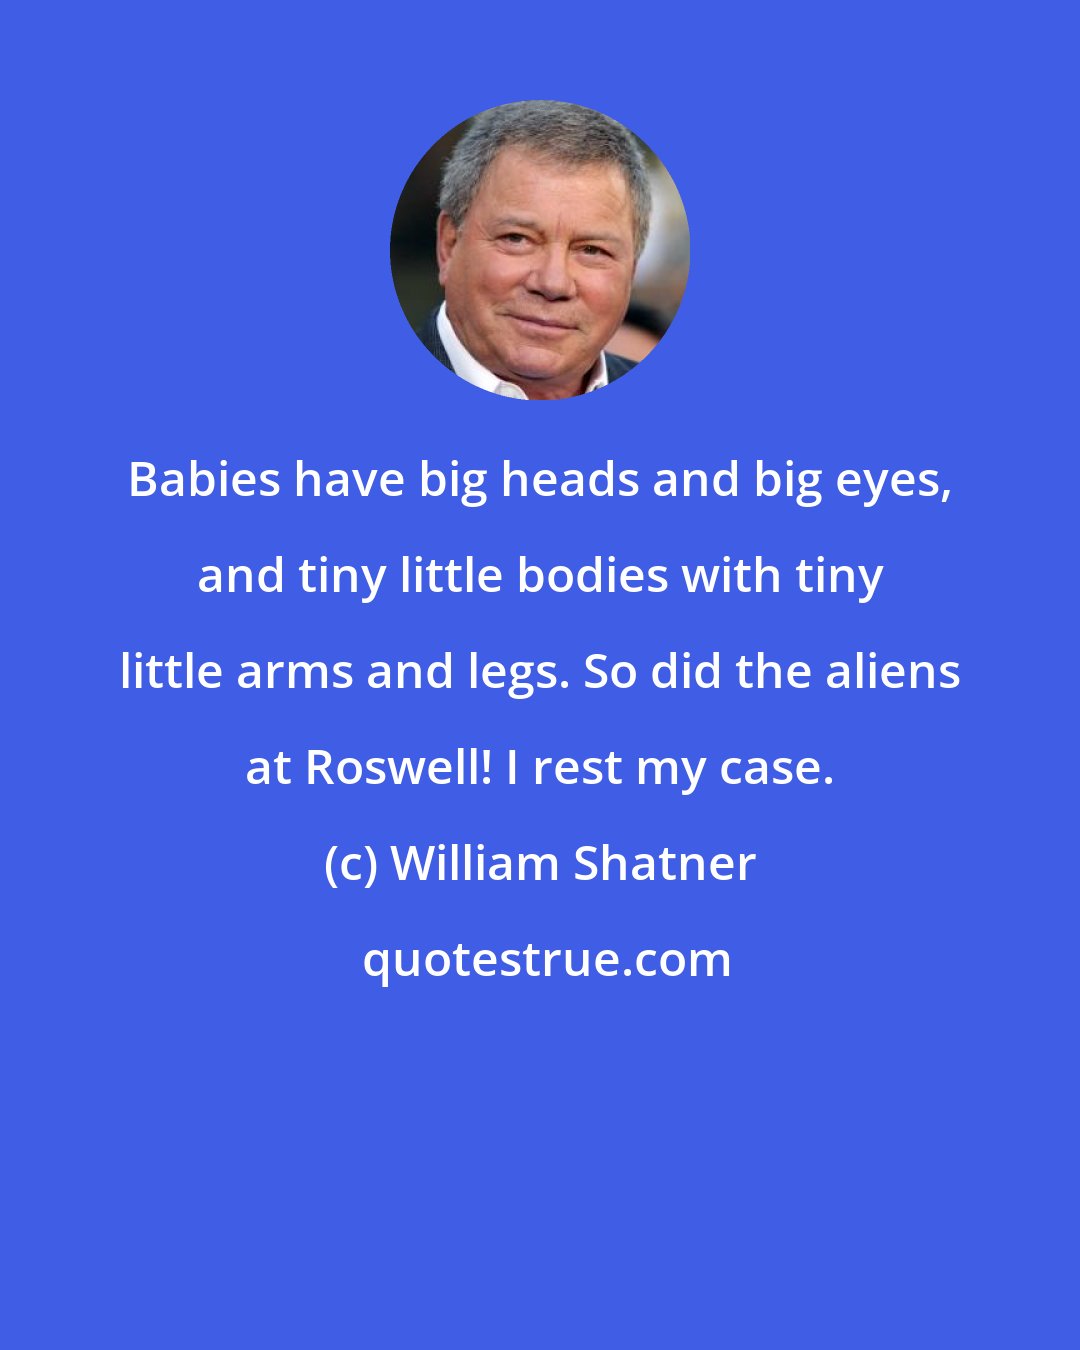 William Shatner: Babies have big heads and big eyes, and tiny little bodies with tiny little arms and legs. So did the aliens at Roswell! I rest my case.